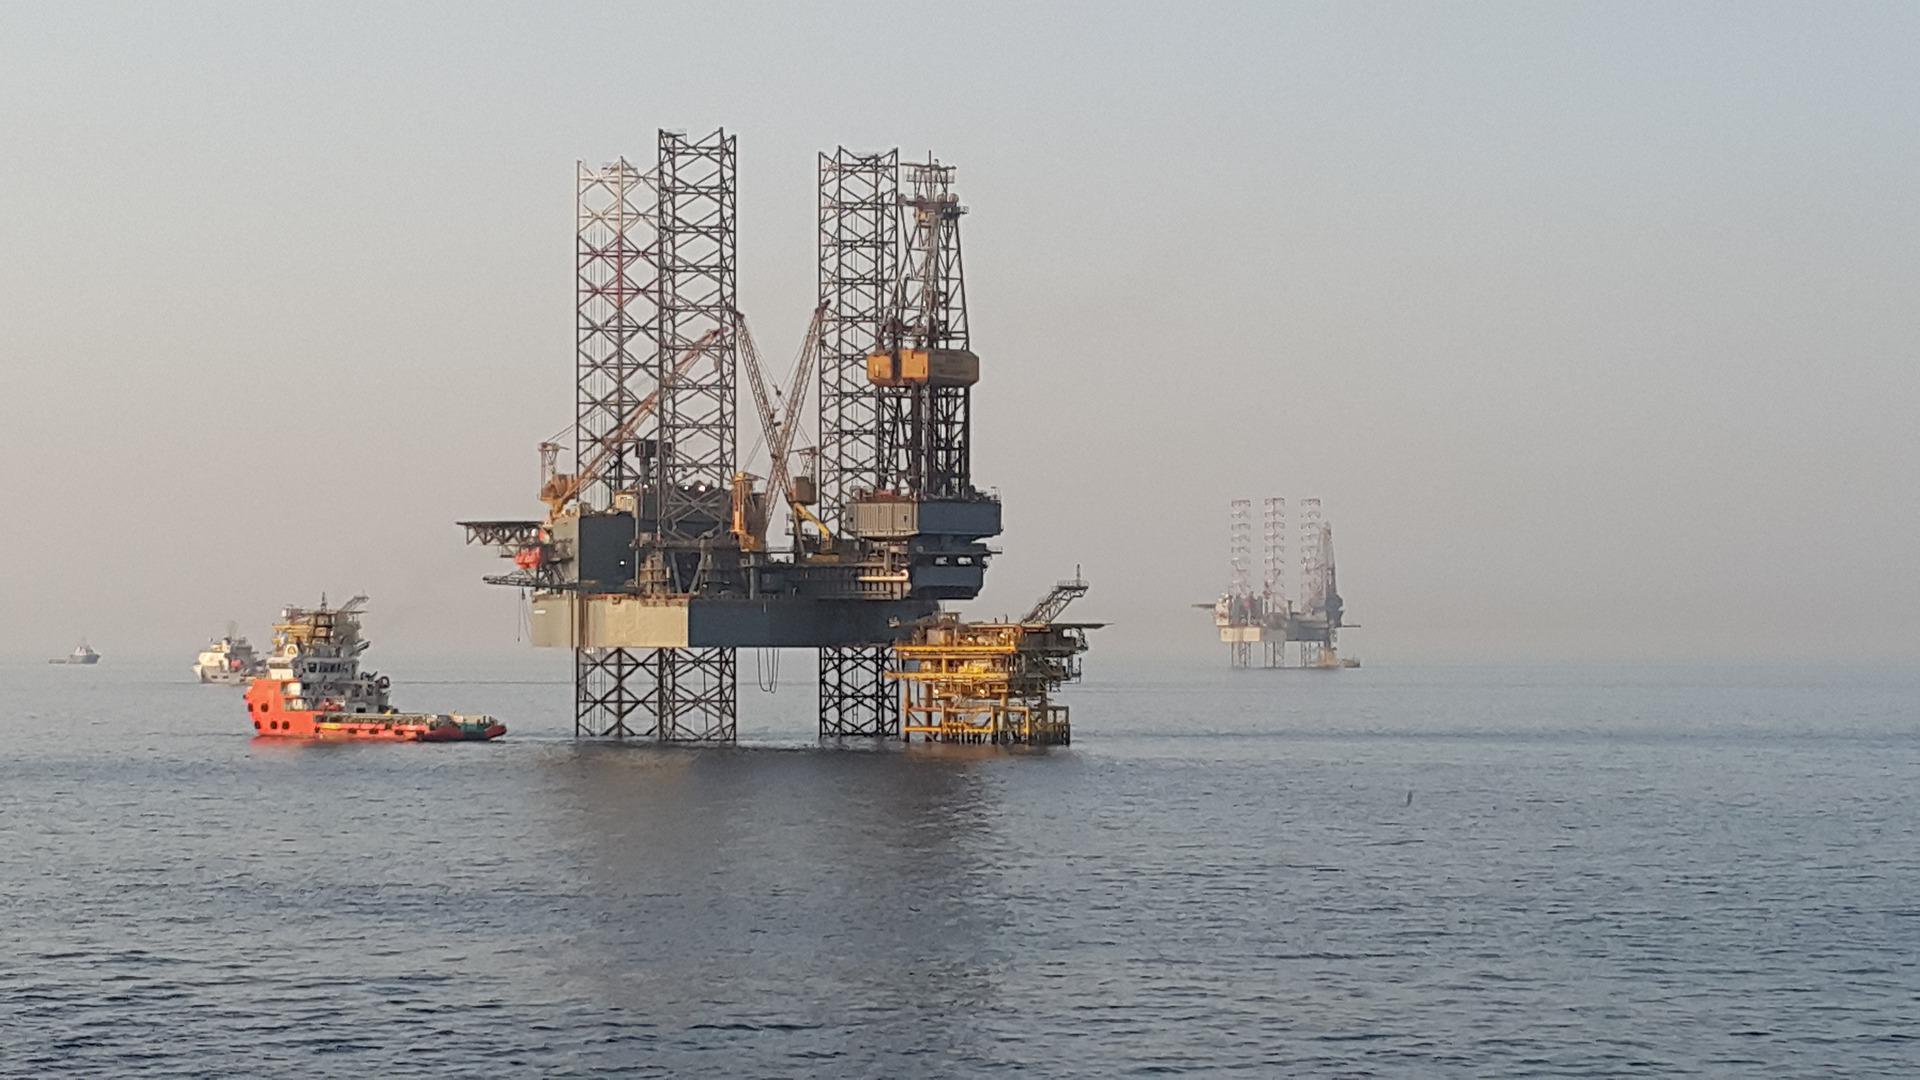 McDermott secures subsea contract from TotalEnergies in Angola